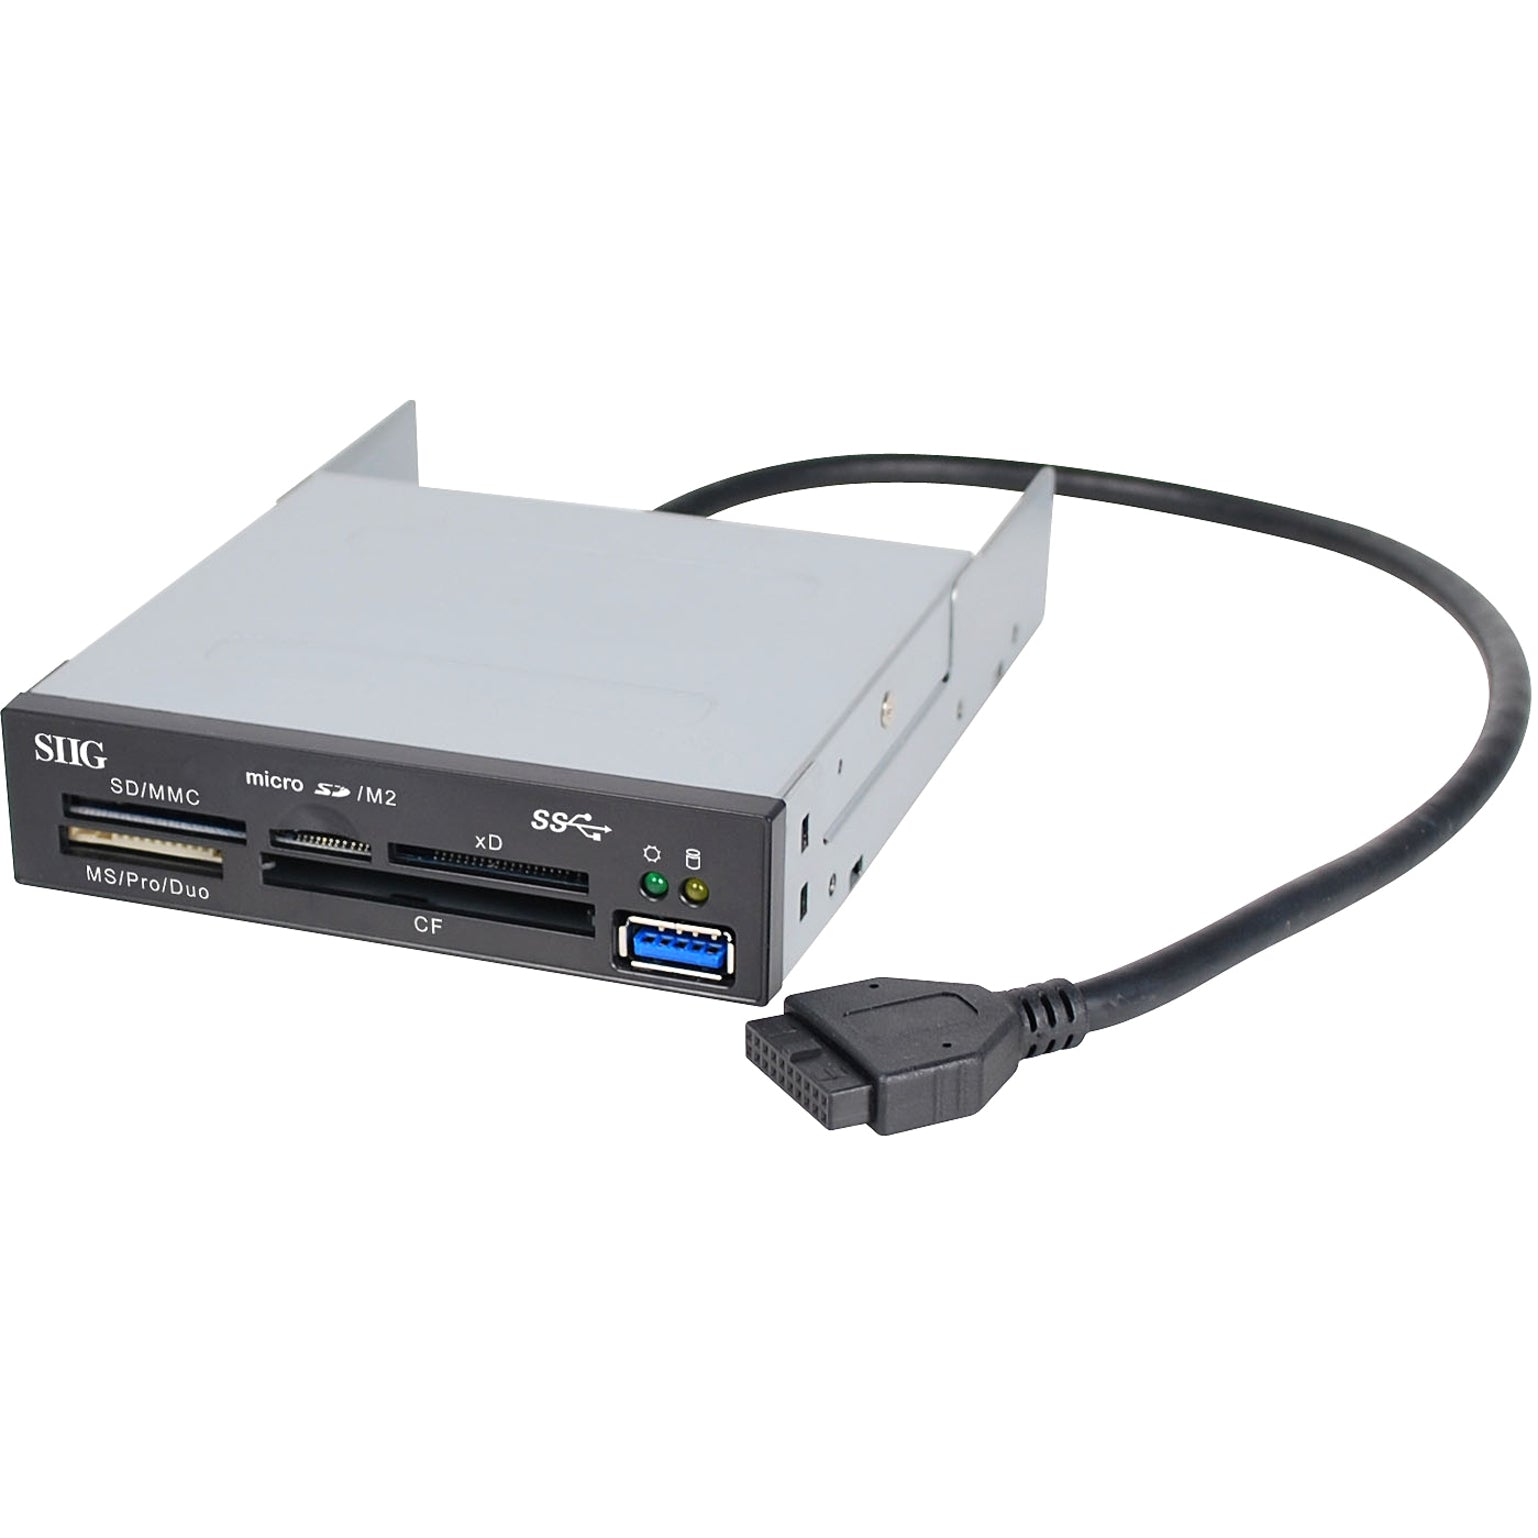 SIIG JU-MR0A11-S1 USB 3.0 Internal Bay Multi Card Reader, 5GB/s Data Transfer Rate, PC Compatible